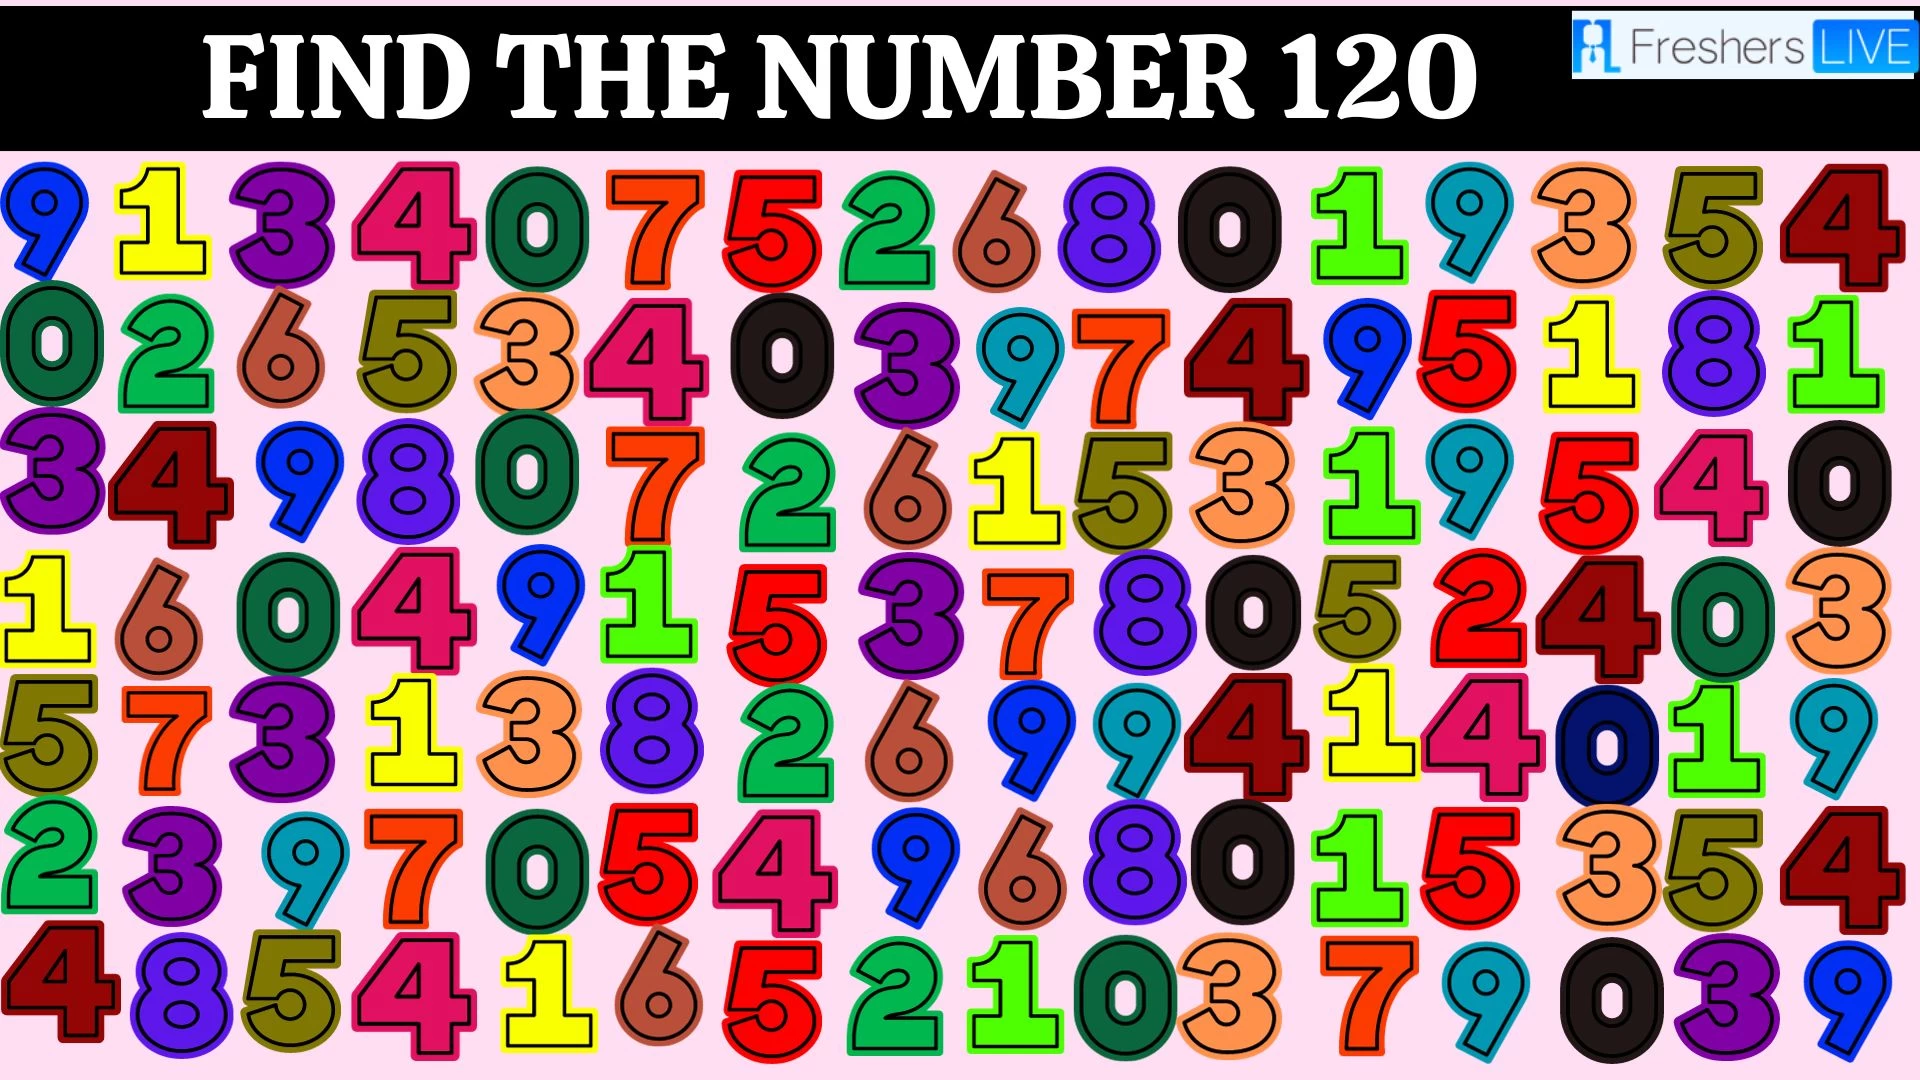 Test Your Lateral Thinking Skills Find the Number 120 Within 10 Seconds